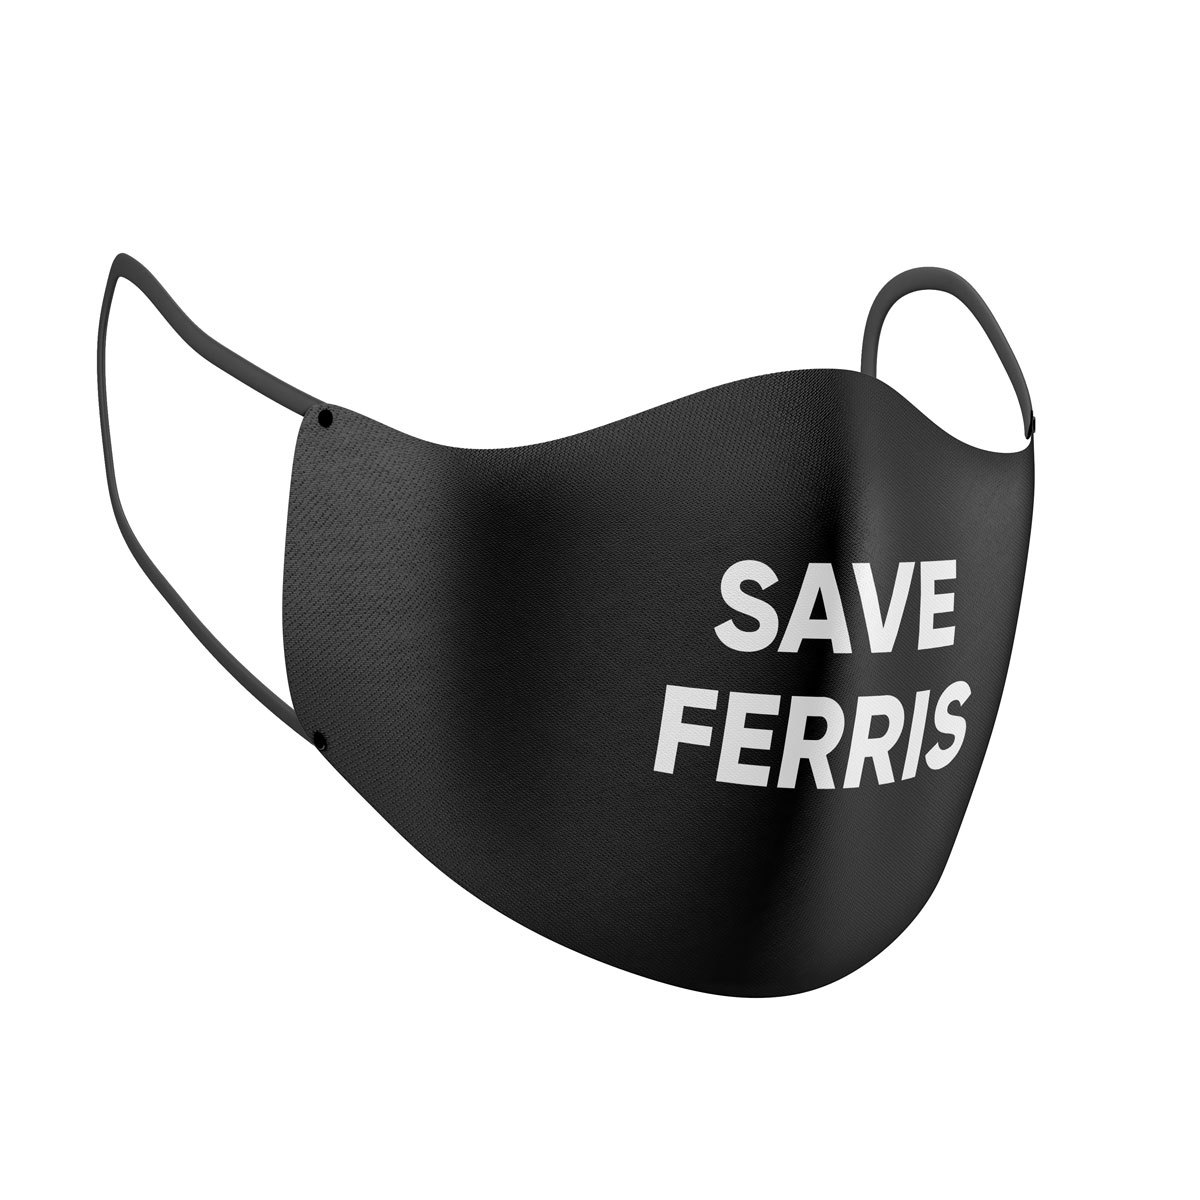 Image of Ferris Bueller''s Day Off Save Ferris Deluxe Face Mask